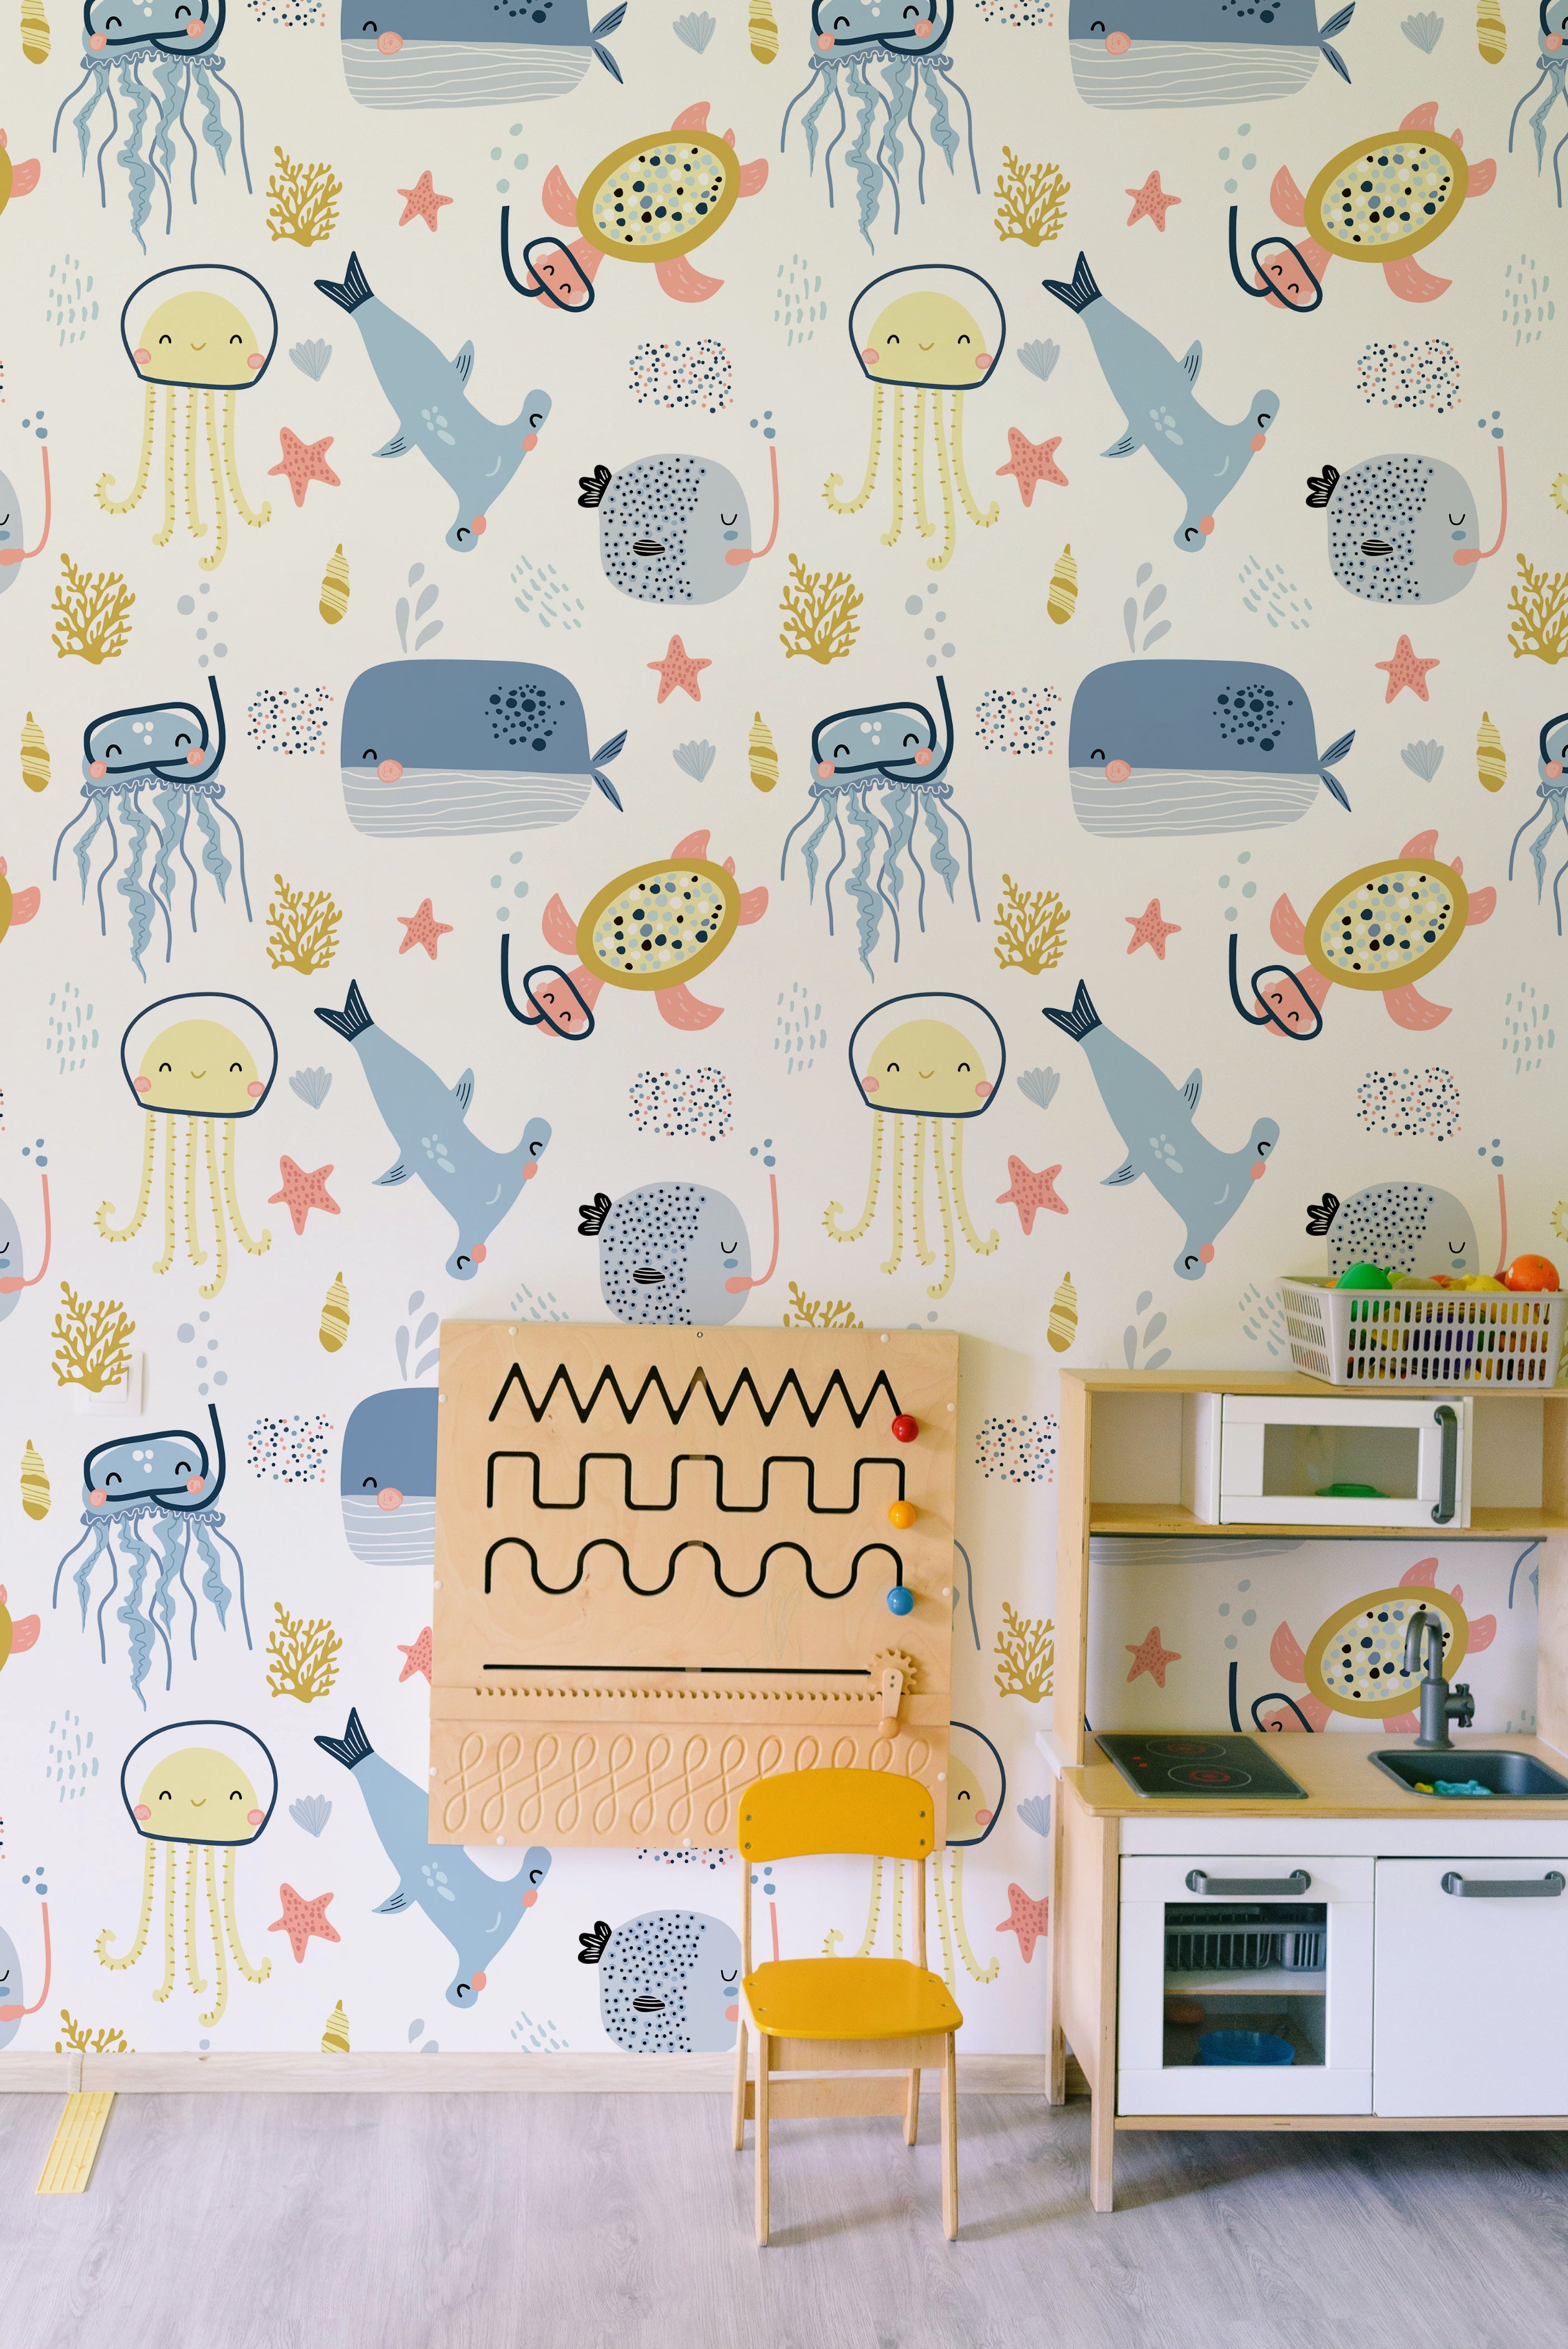  A colorful children's room featuring a wall adorned with an under-the-sea-themed wallpaper. The wallpaper includes playful illustrations of sea creatures like jellyfish, whales, sea turtles, and coral. The room is furnished with a small play kitchen and a wooden activity board, creating an engaging and imaginative space.